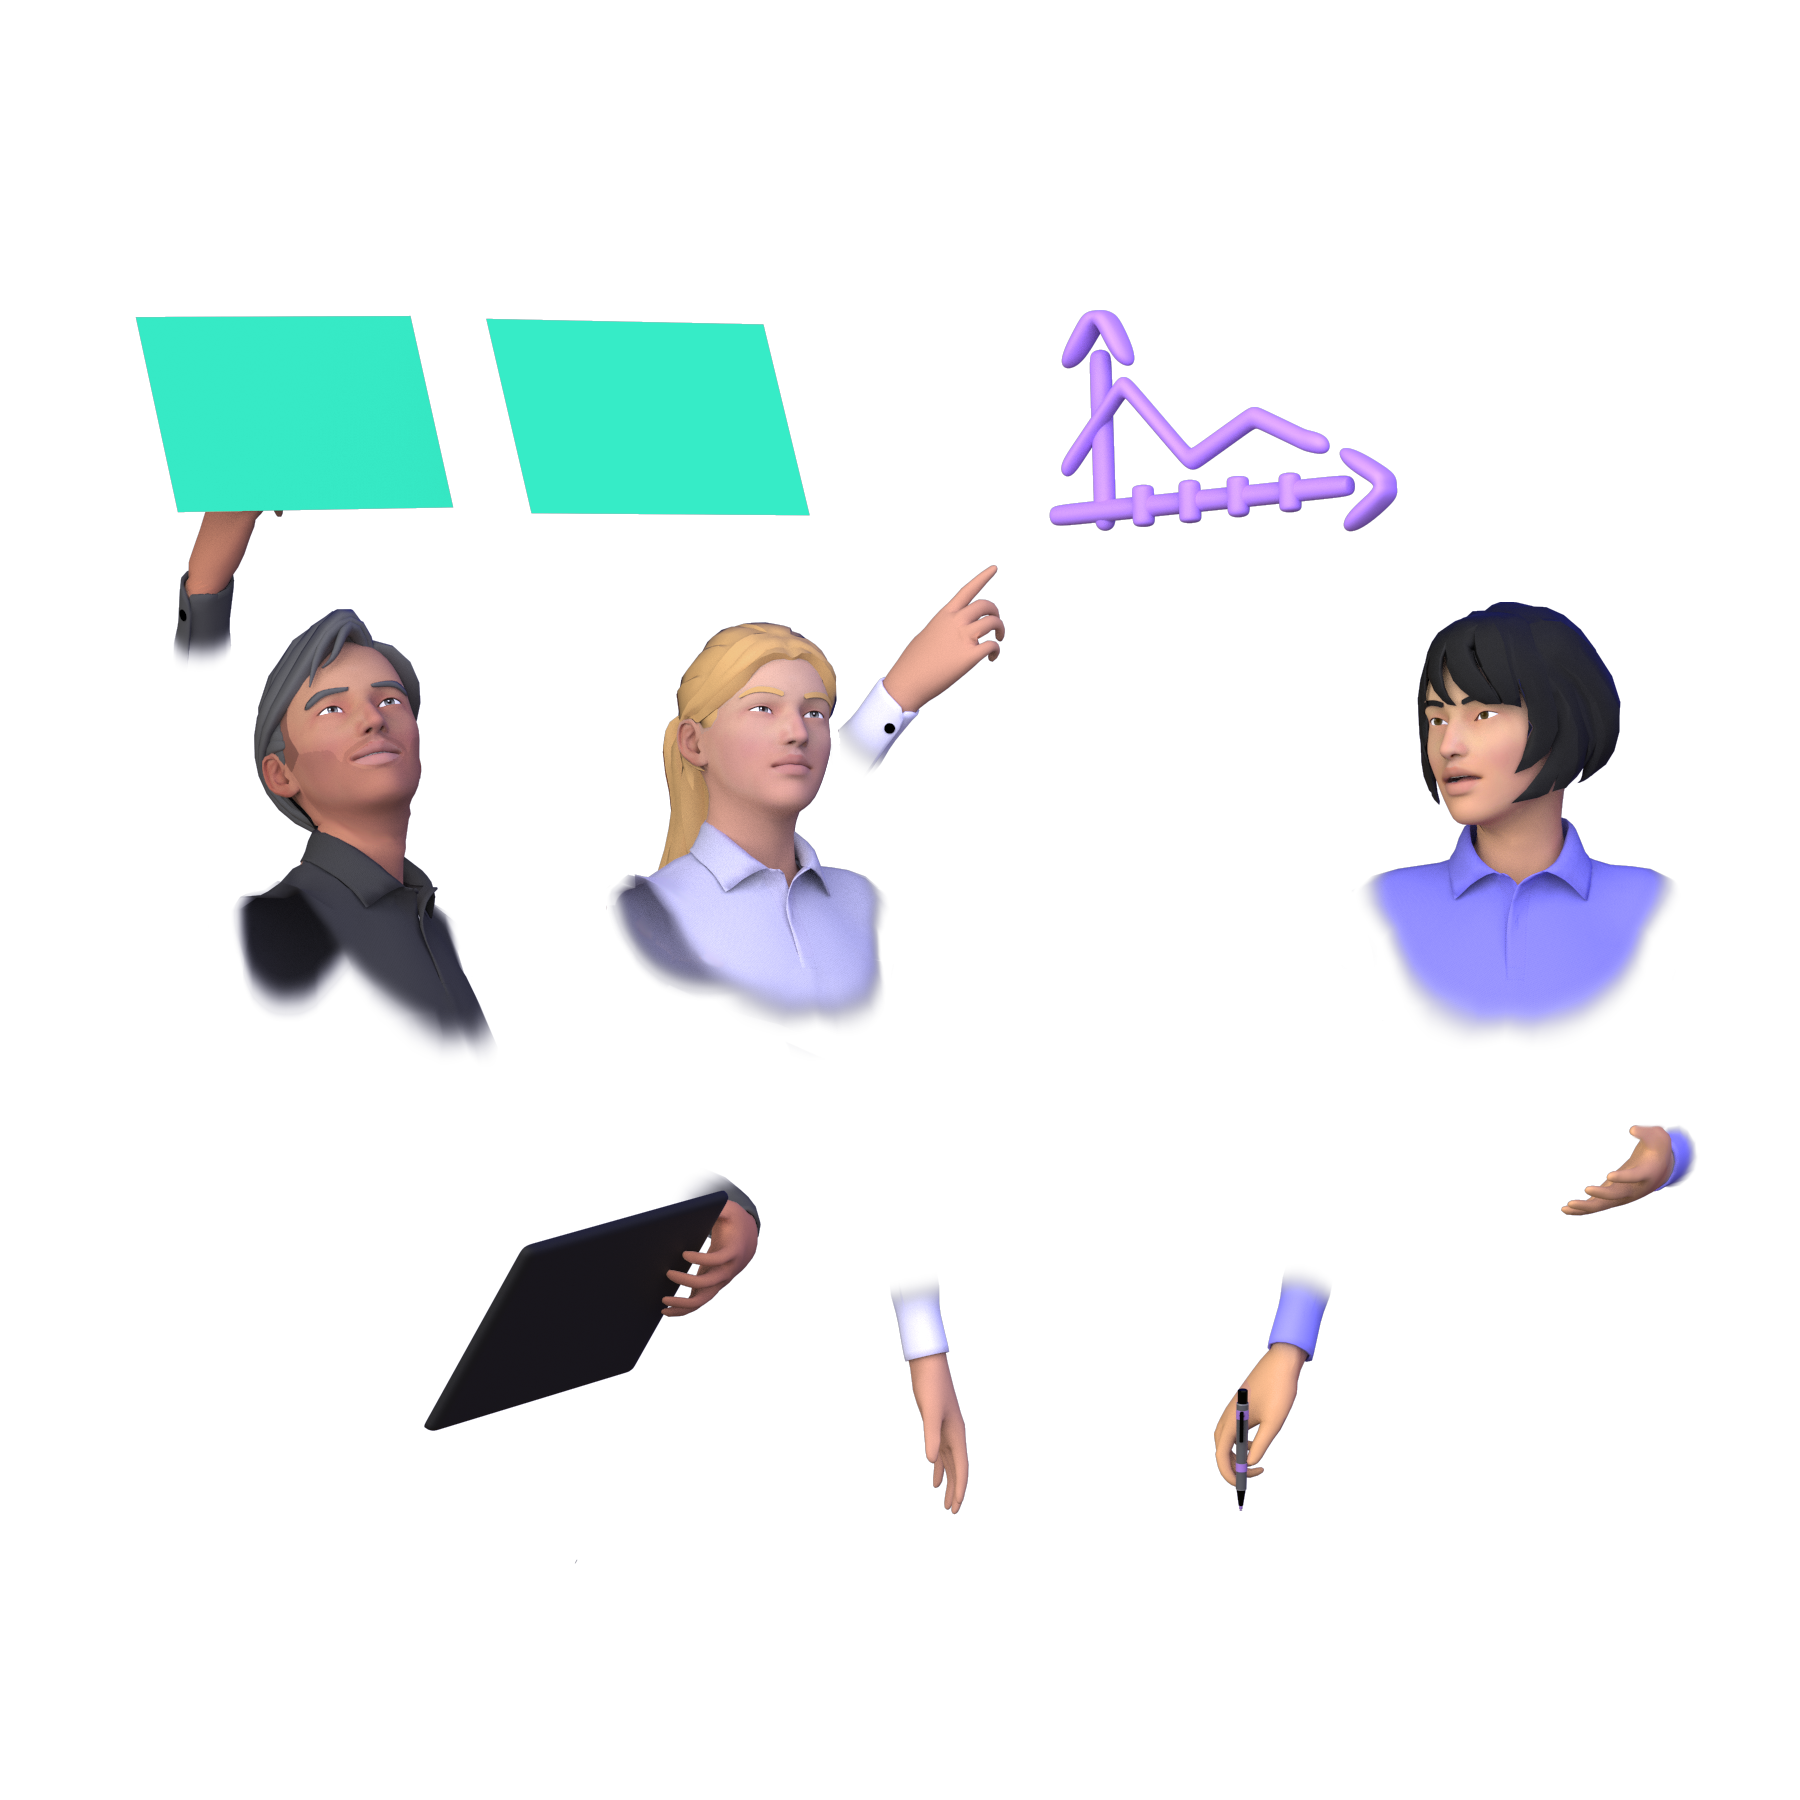 3 avatars collaborating in MeetinVR with graphs and notes